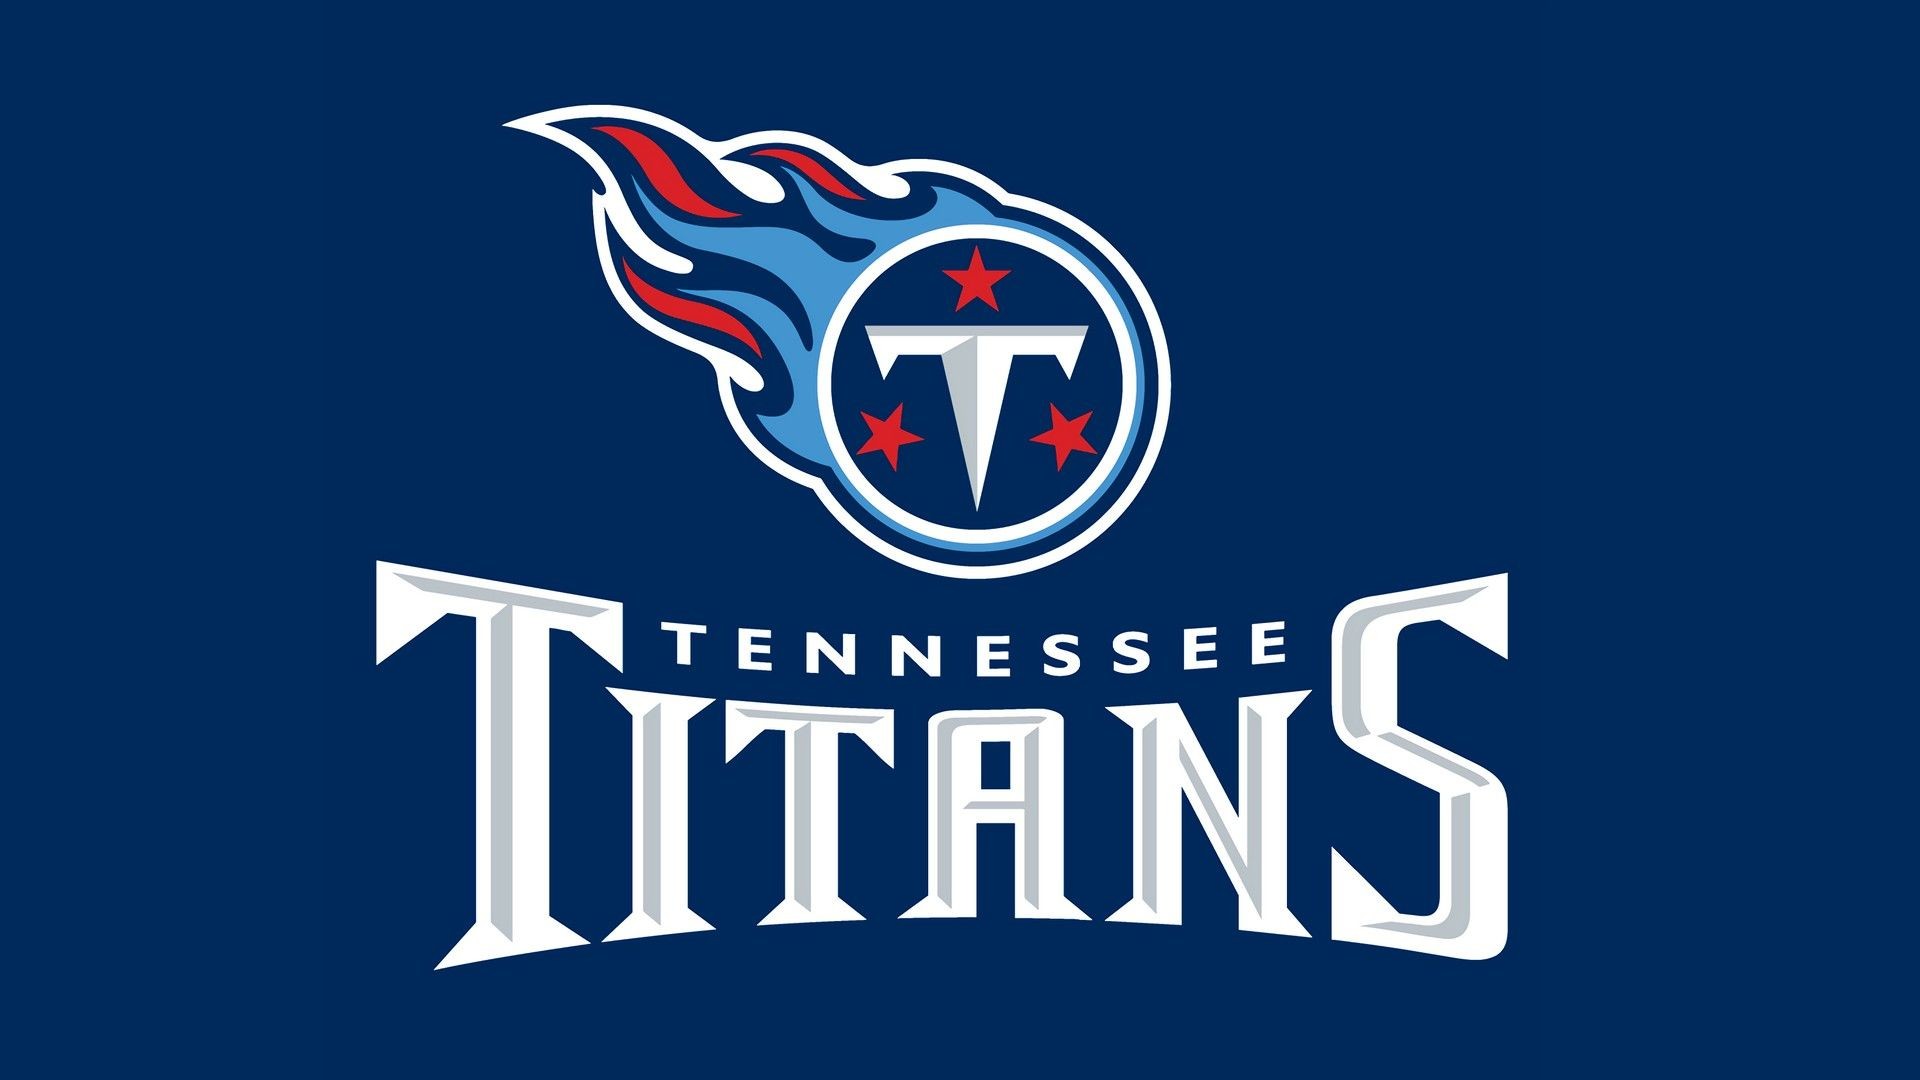 1920x1080 1080x1920 Tennessee Titans Wallpapers HD (52+ images)">